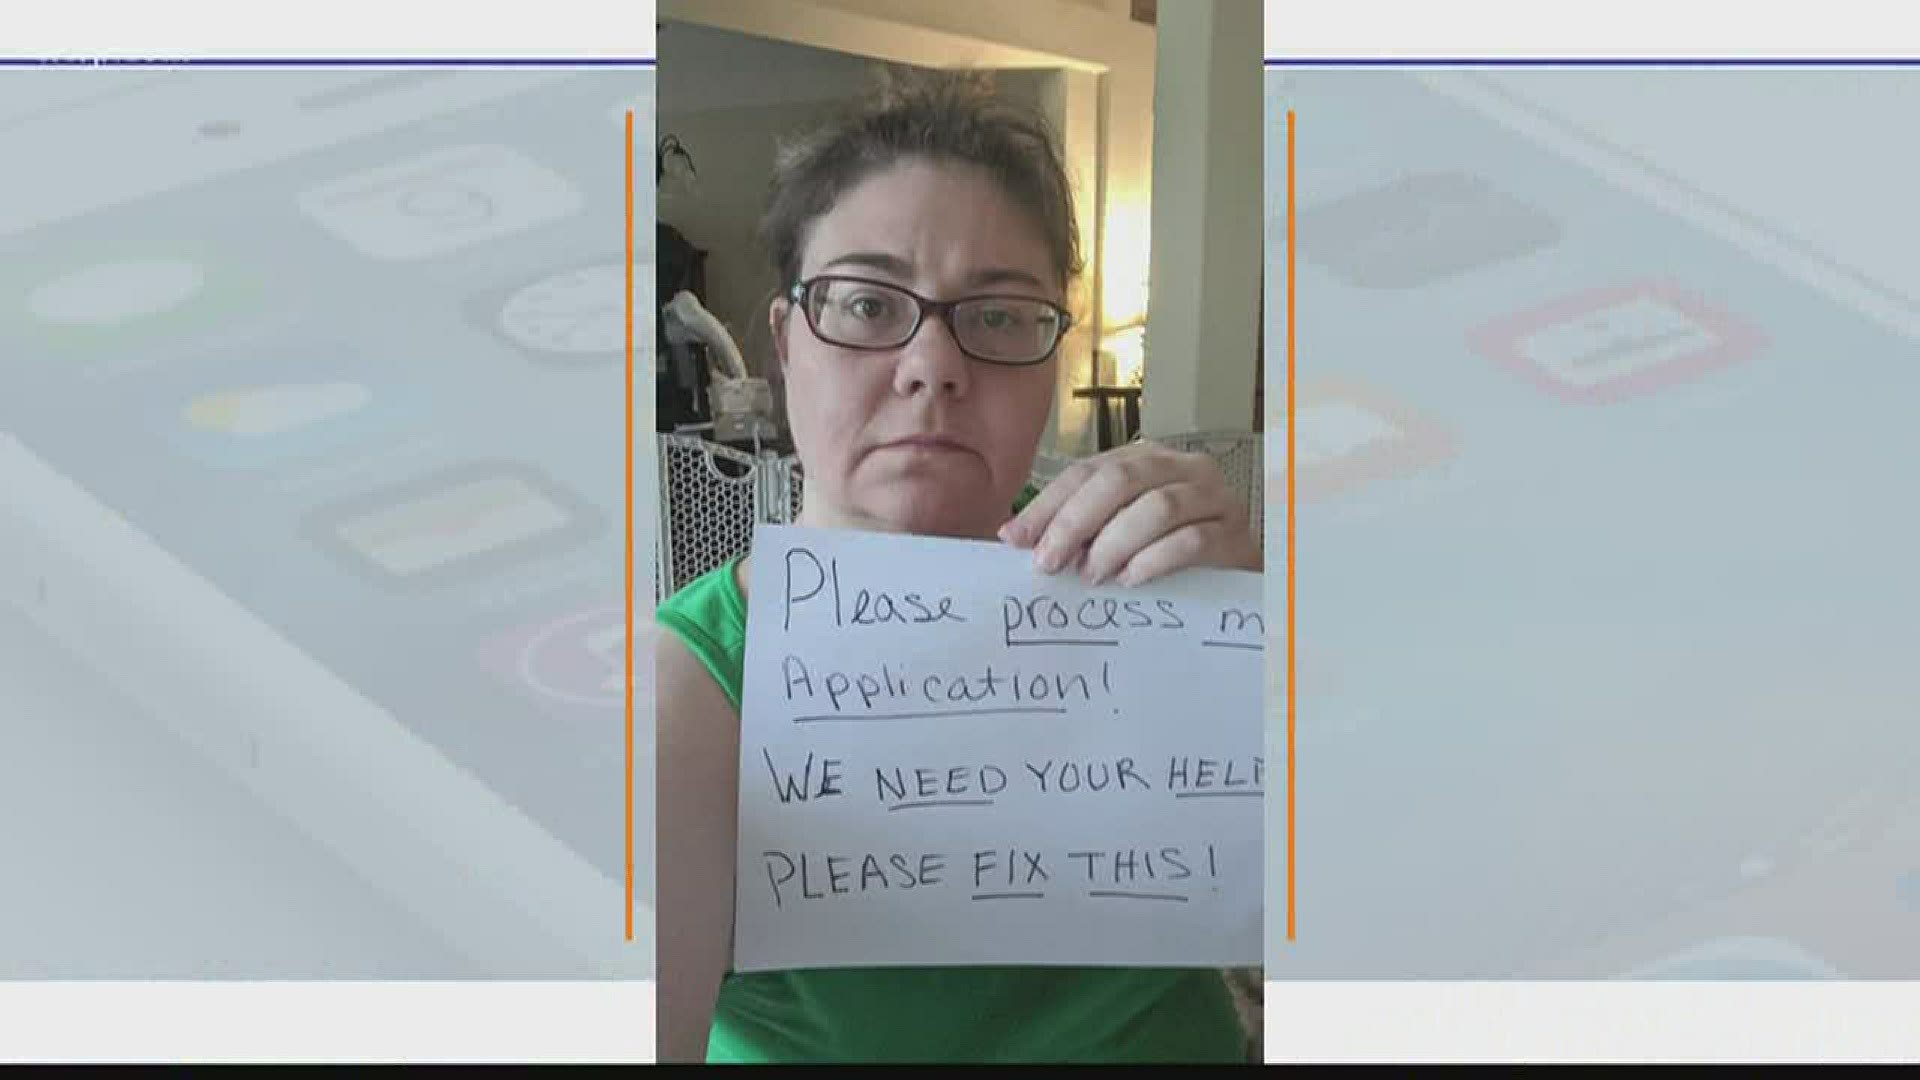 People are posting pictures of selfies and signs on Facebook and Twitter to protest the delays and problems with Florida's unemployment process